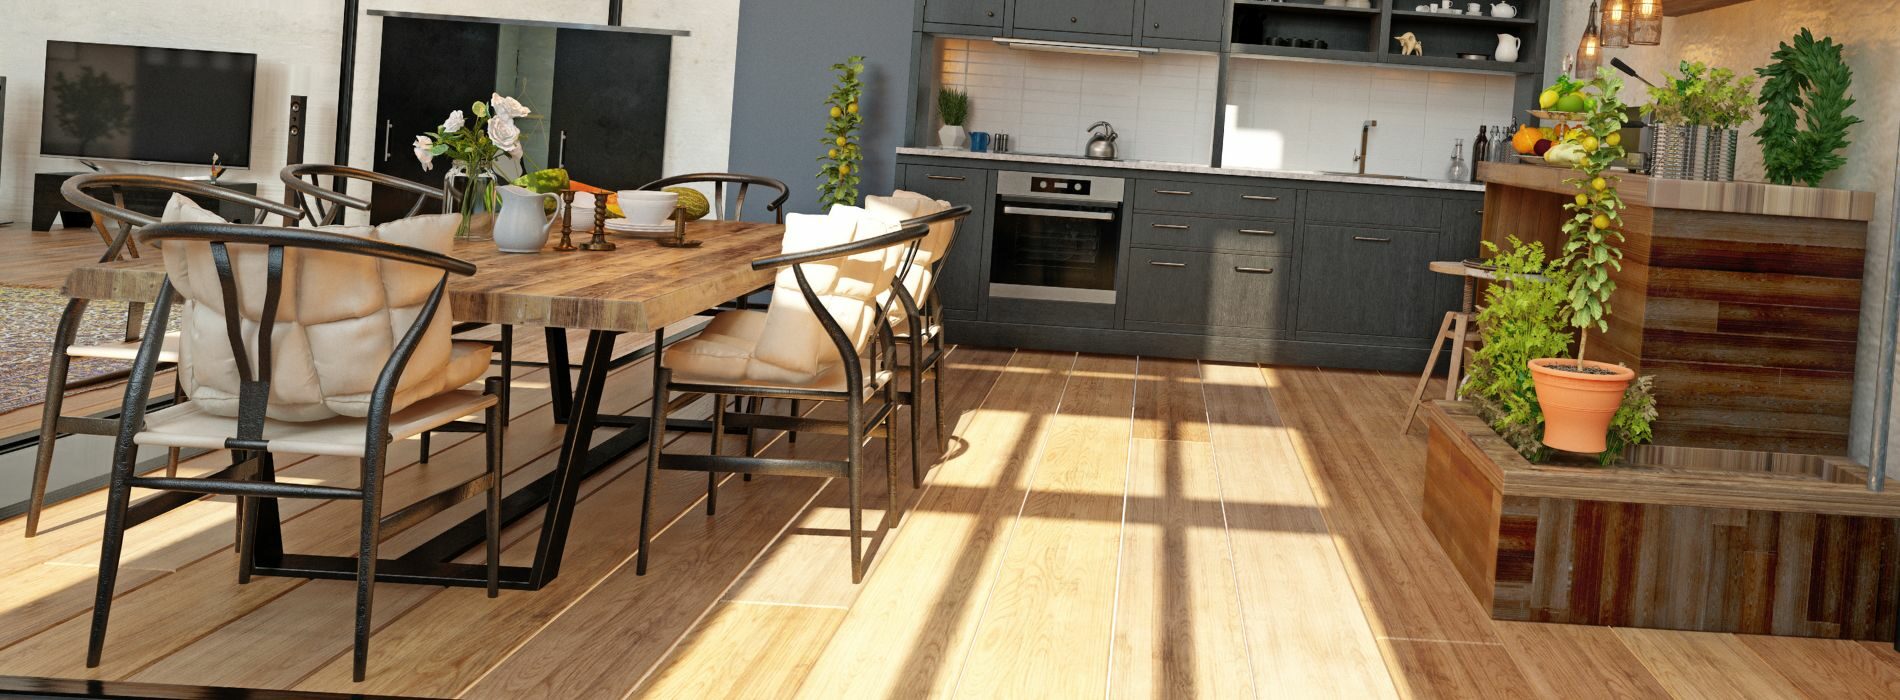 A kitchen and dining room with a wooden floor.